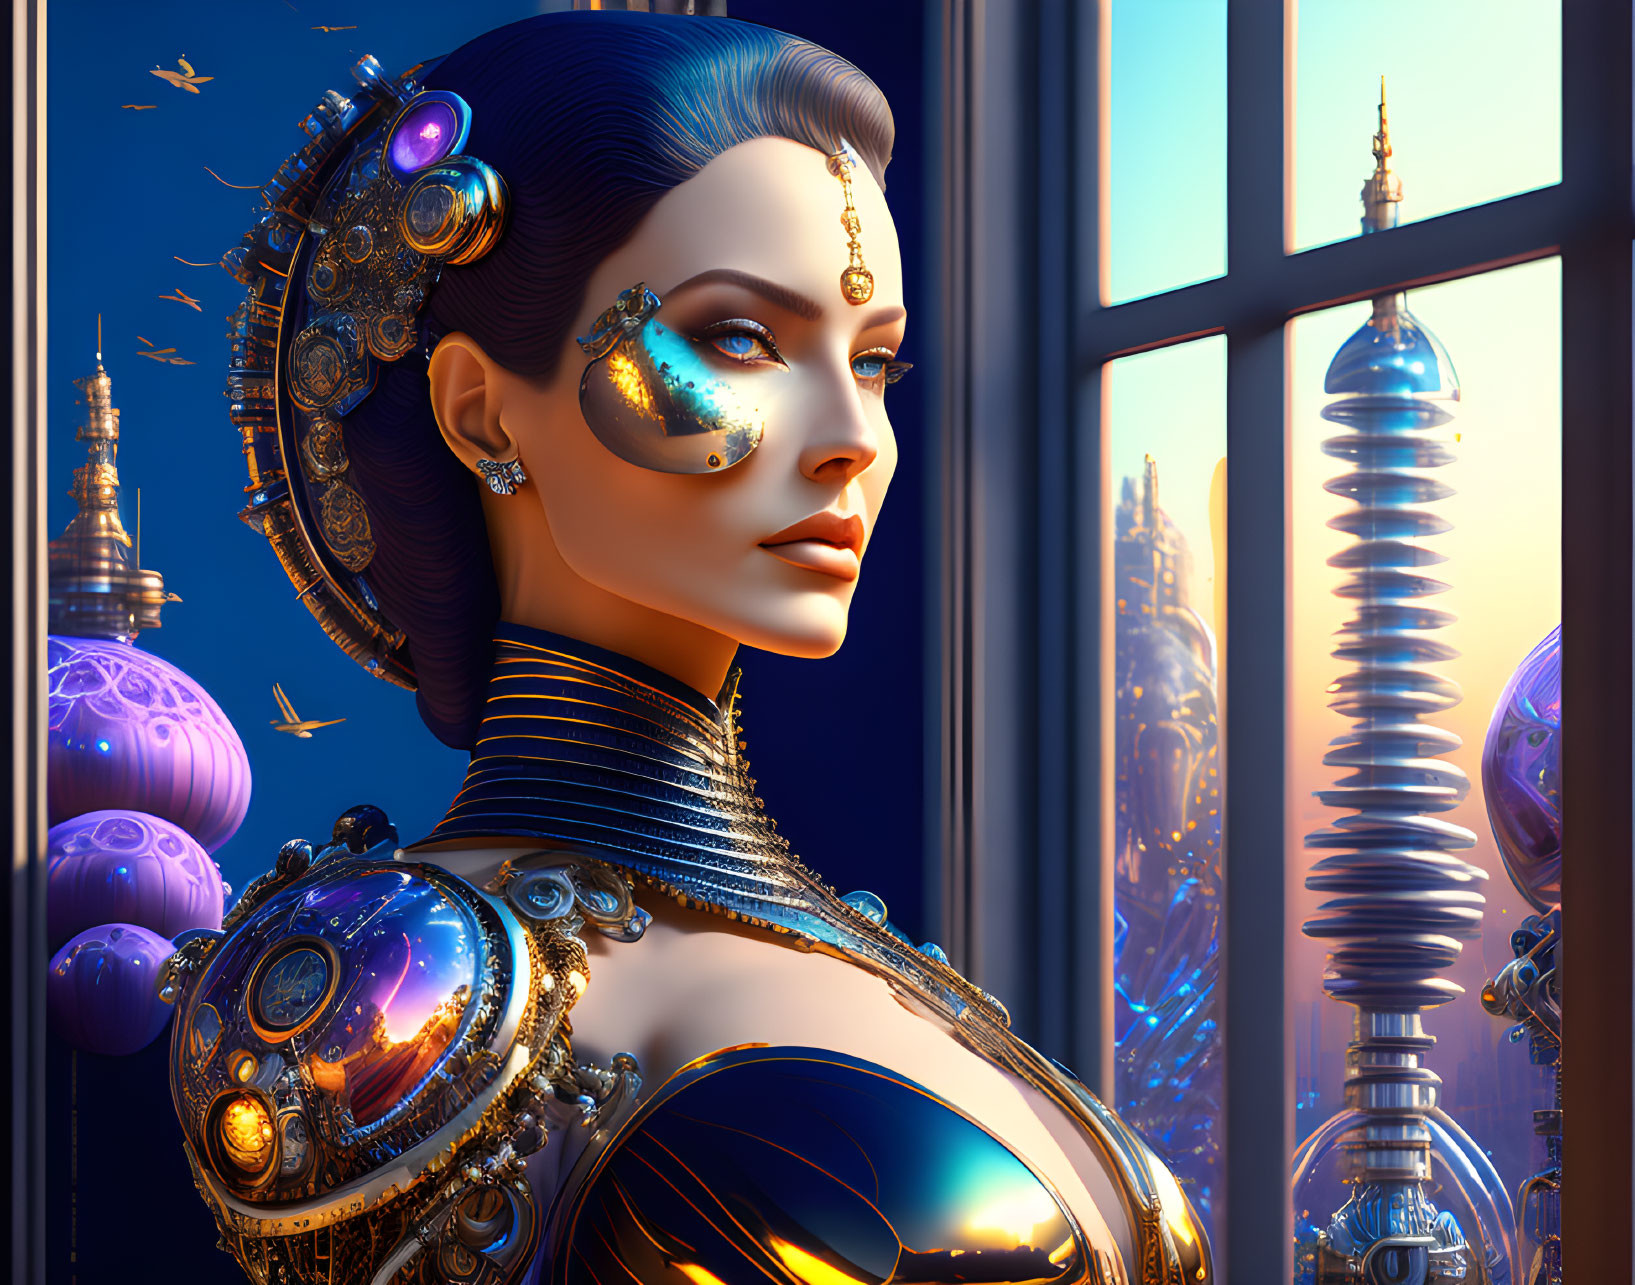 Futuristic female android with gold and blue designs overlooking cityscape